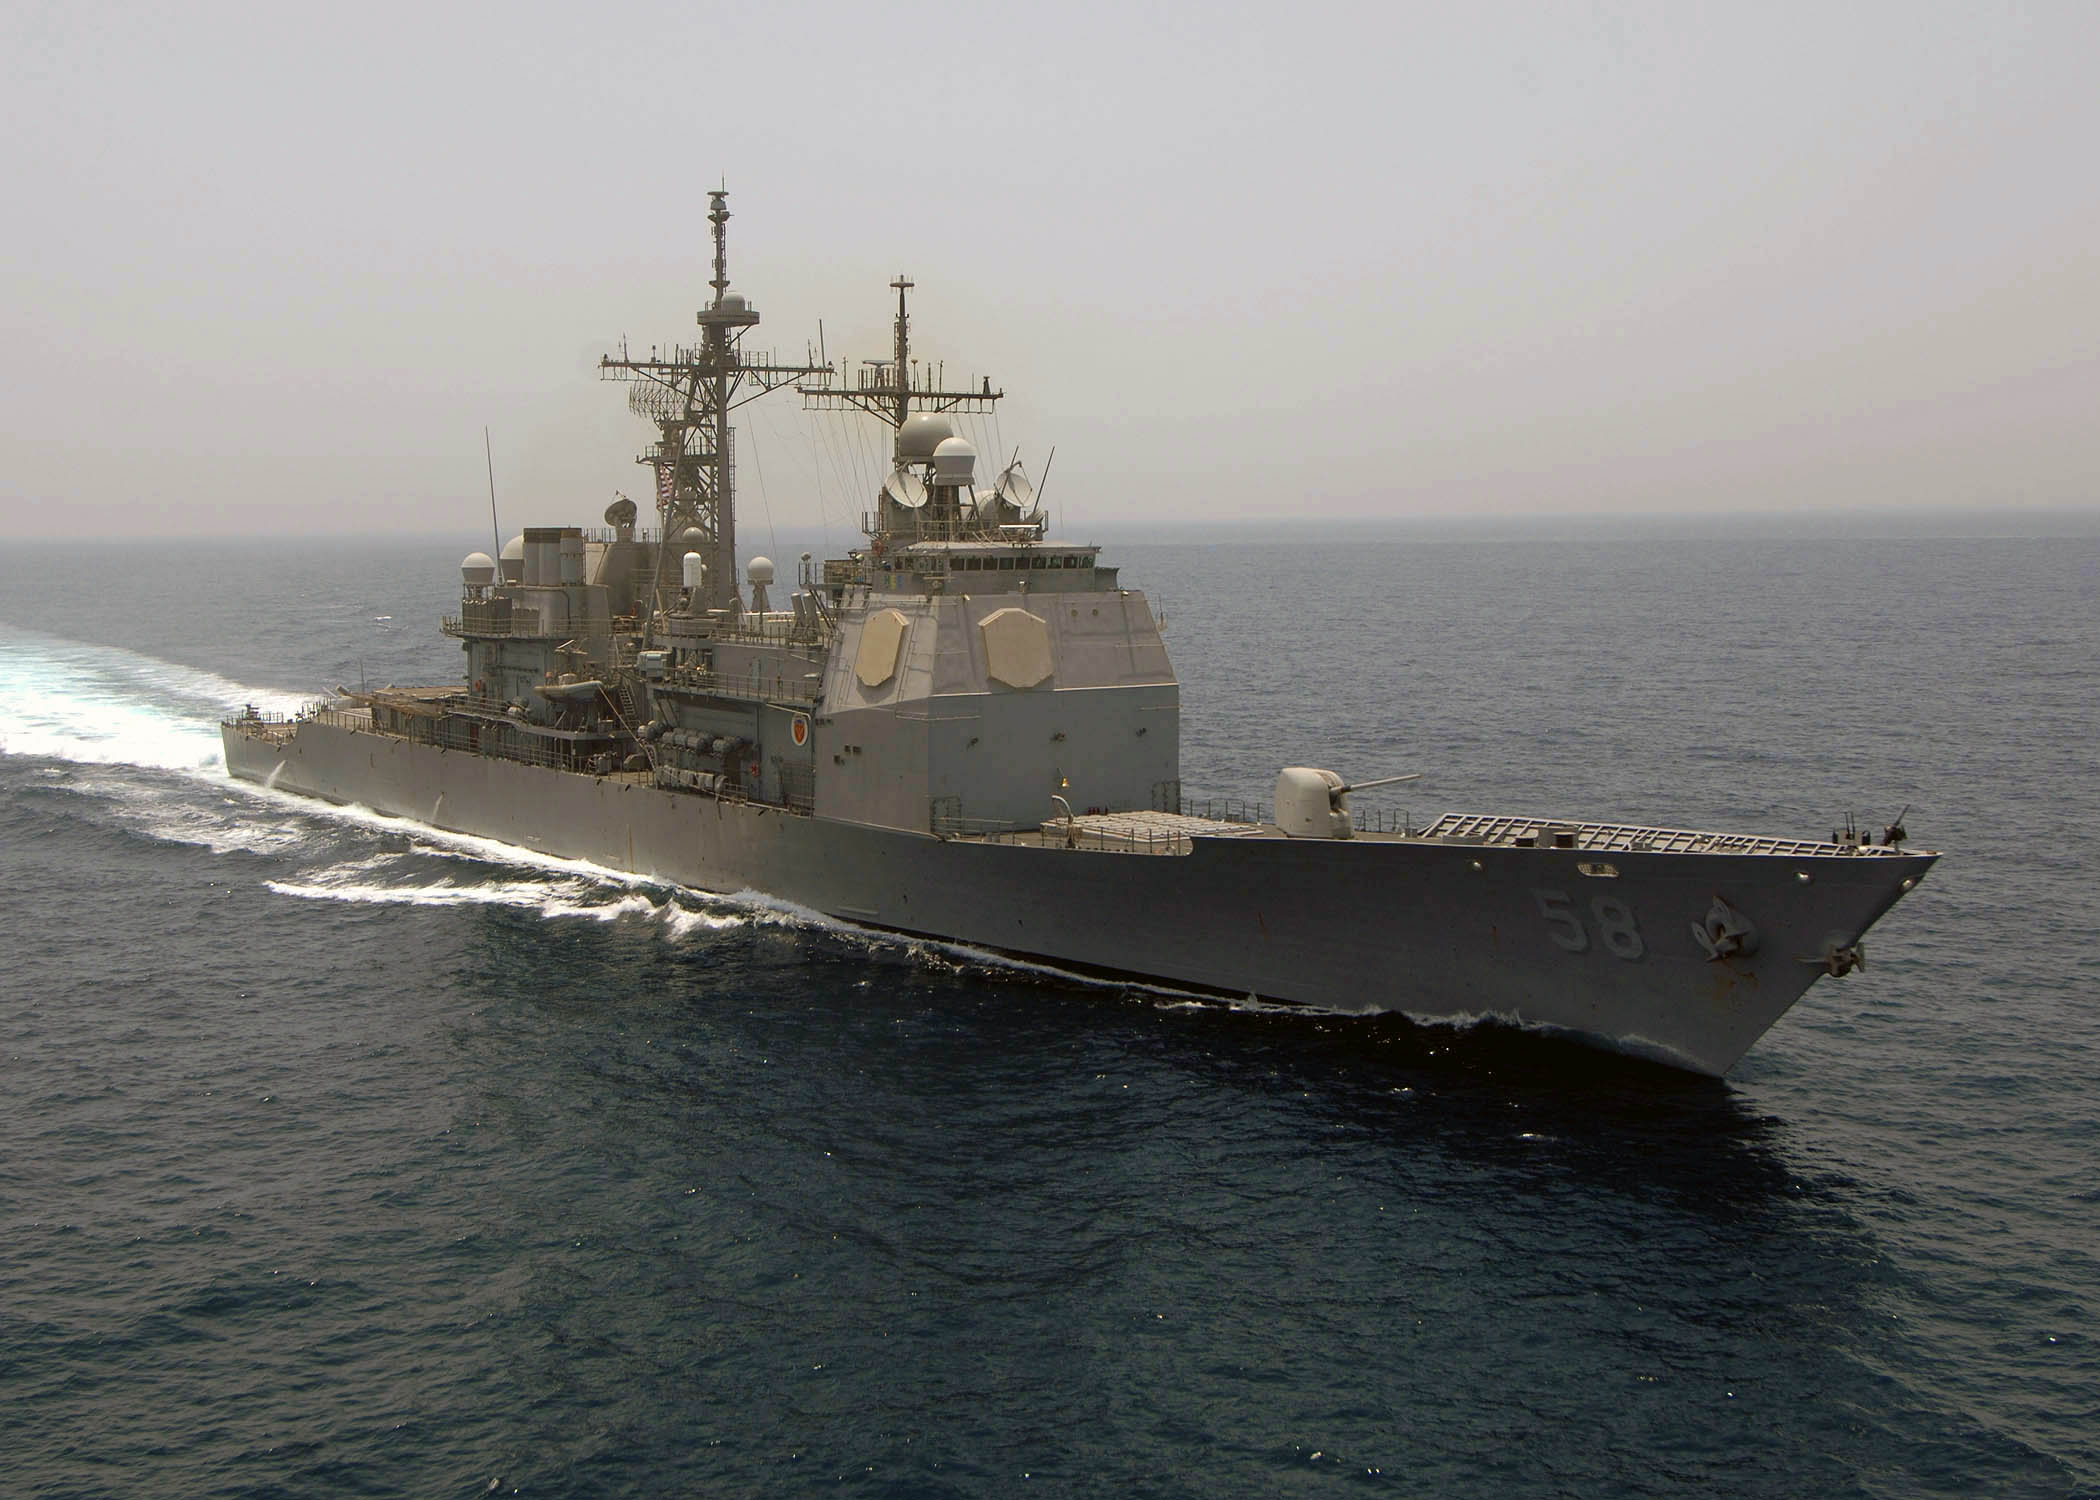 US_Navy_050719-N-5526M-019_The_guided_missile_cruiser_USS_Philippine_Sea_(CG_58_conducts_Surface_Action_Group_operations_during_exercise_Nautical_Union.jpg